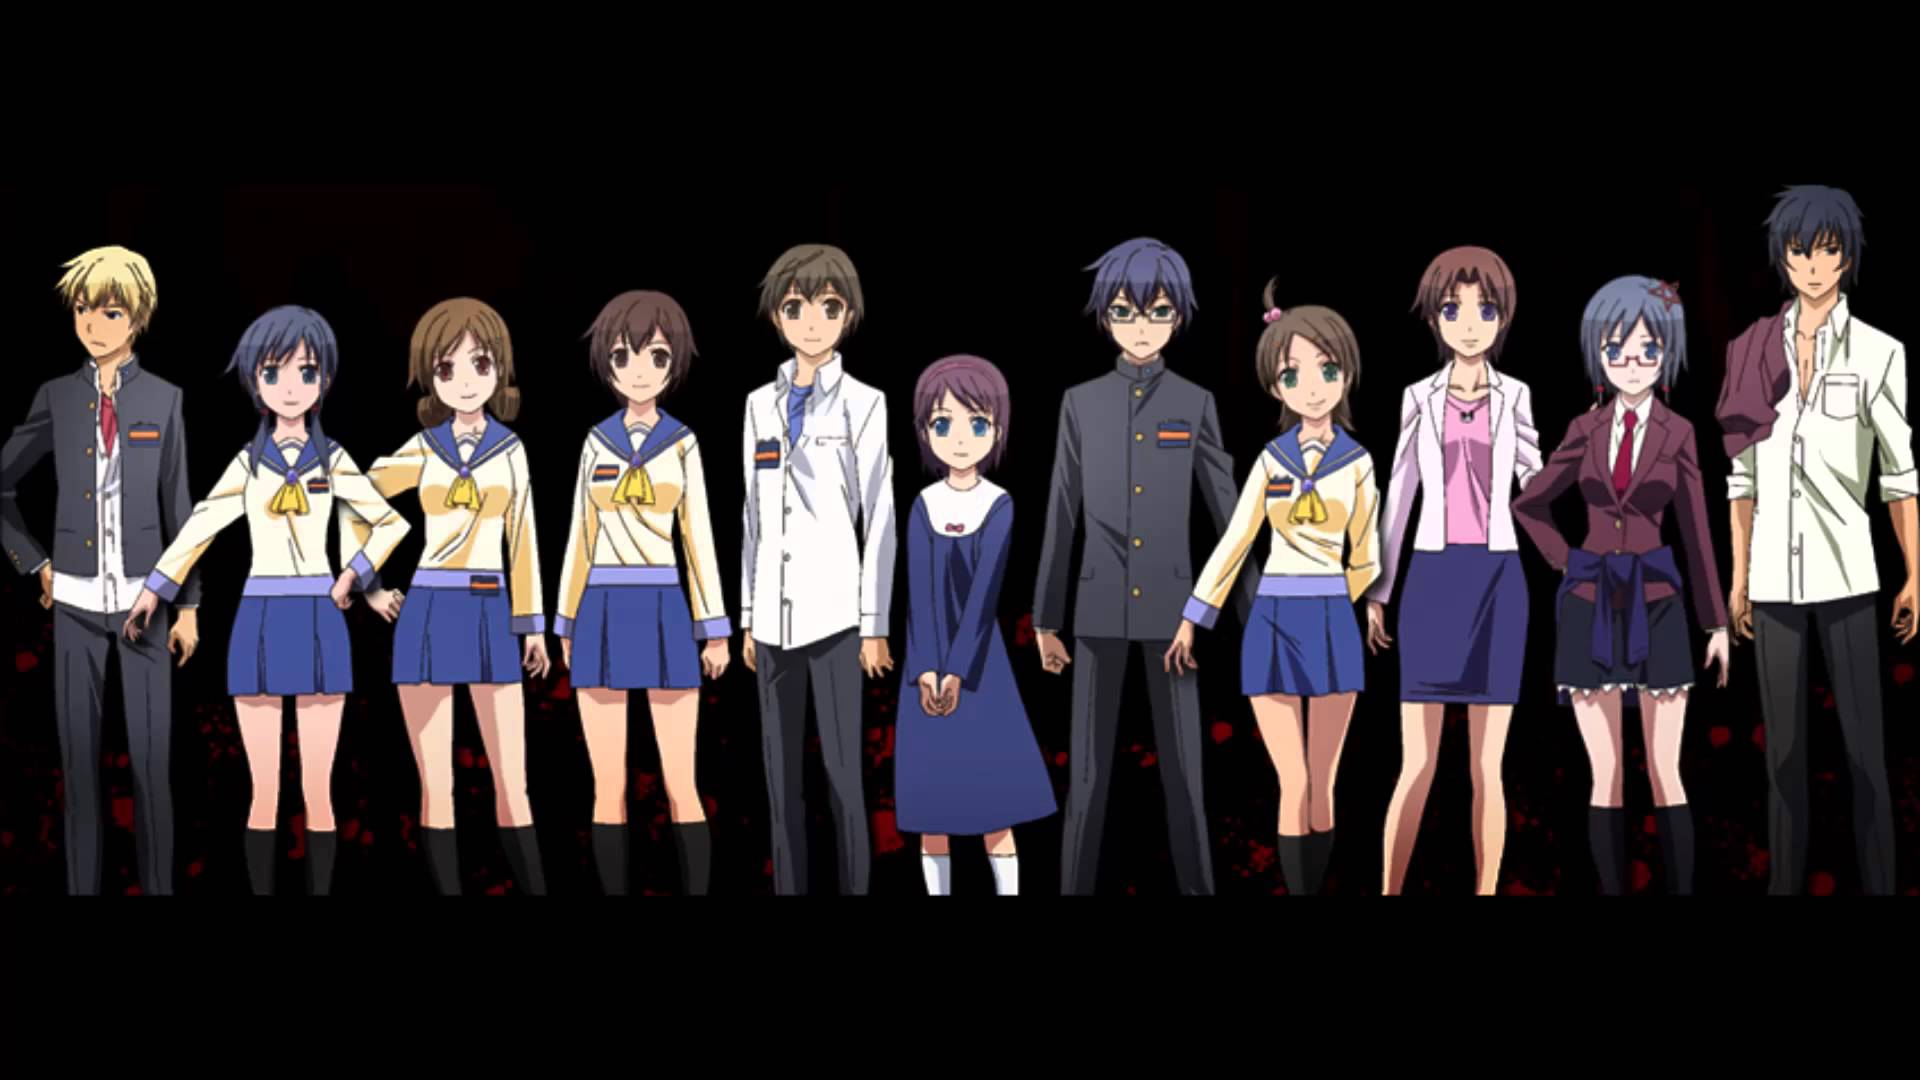 Corpse Party Wallpaper HD Photo Collections